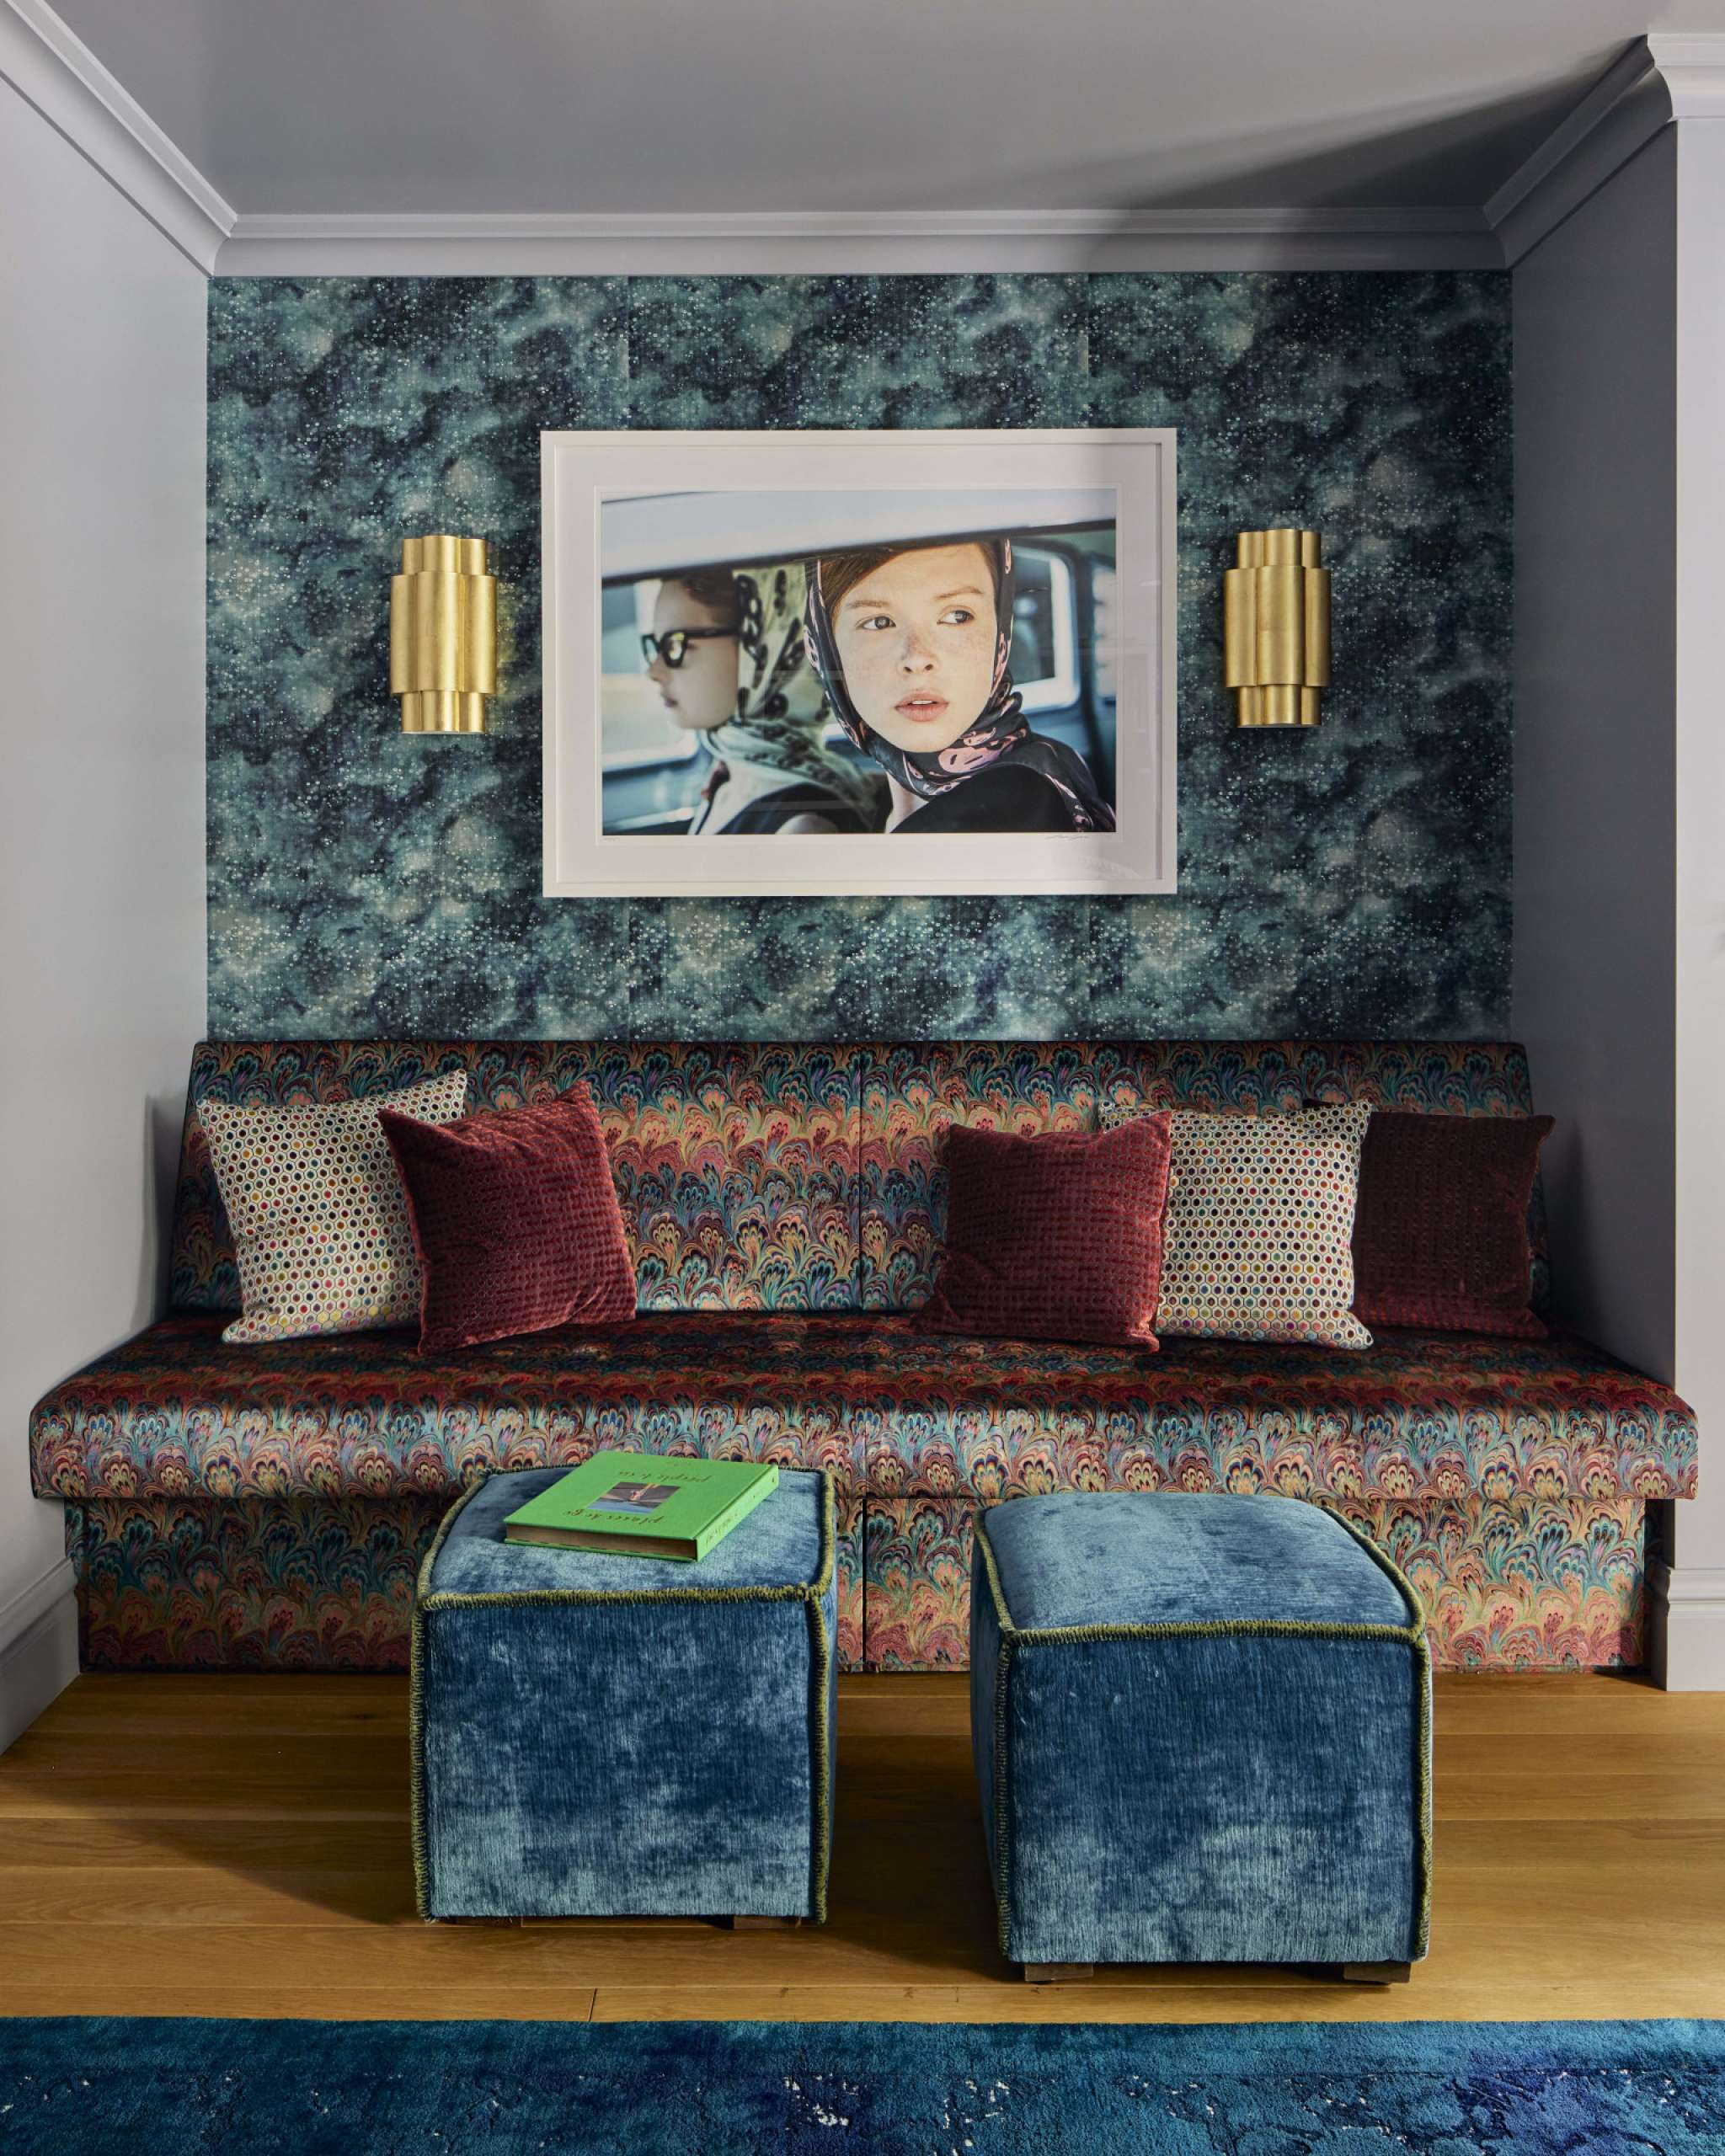 Upper_eastside_townhouse_banquette_pc_gieves anderson.